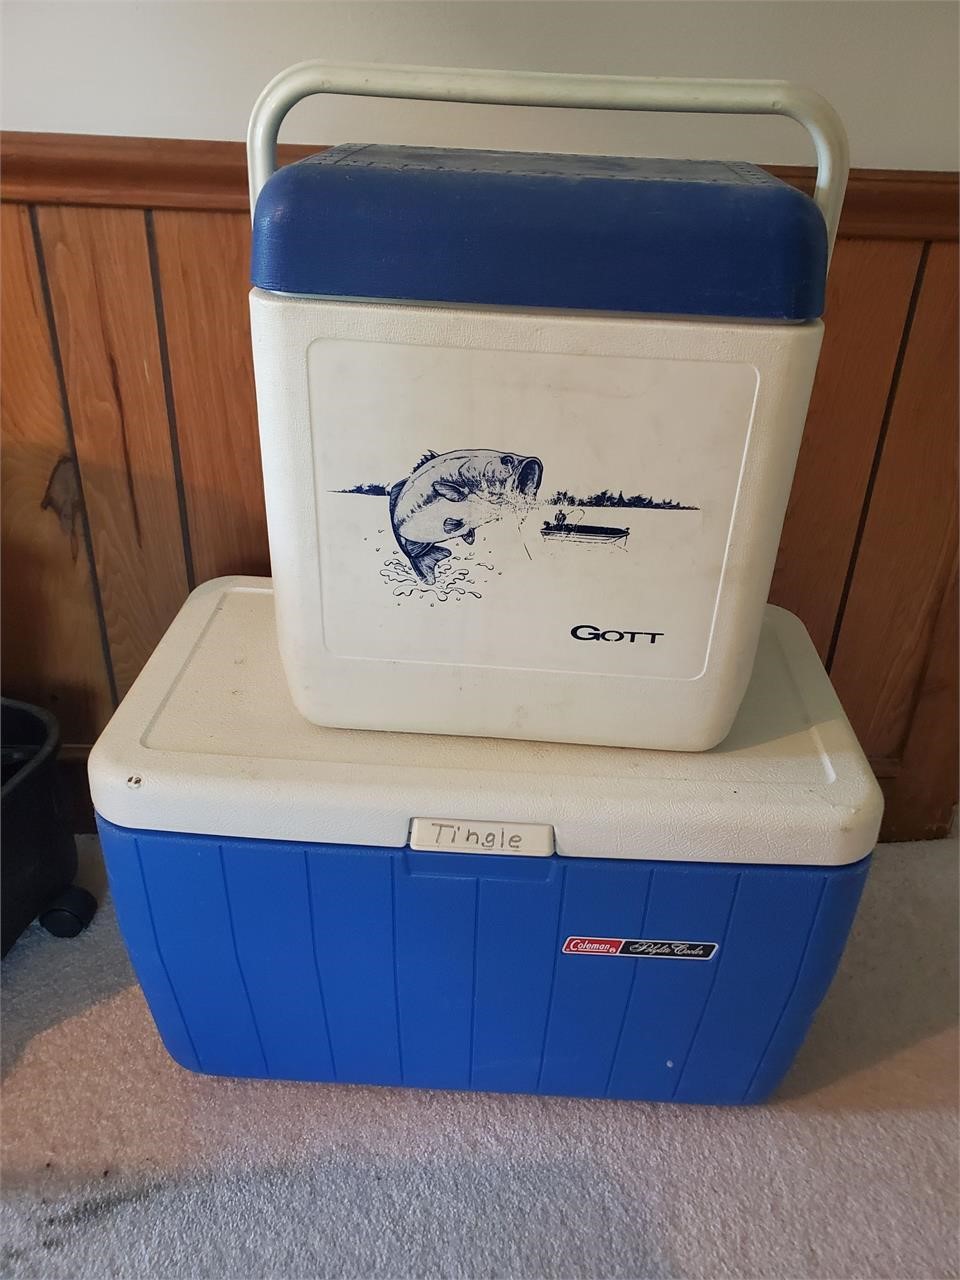 Coleman and Gott coolers